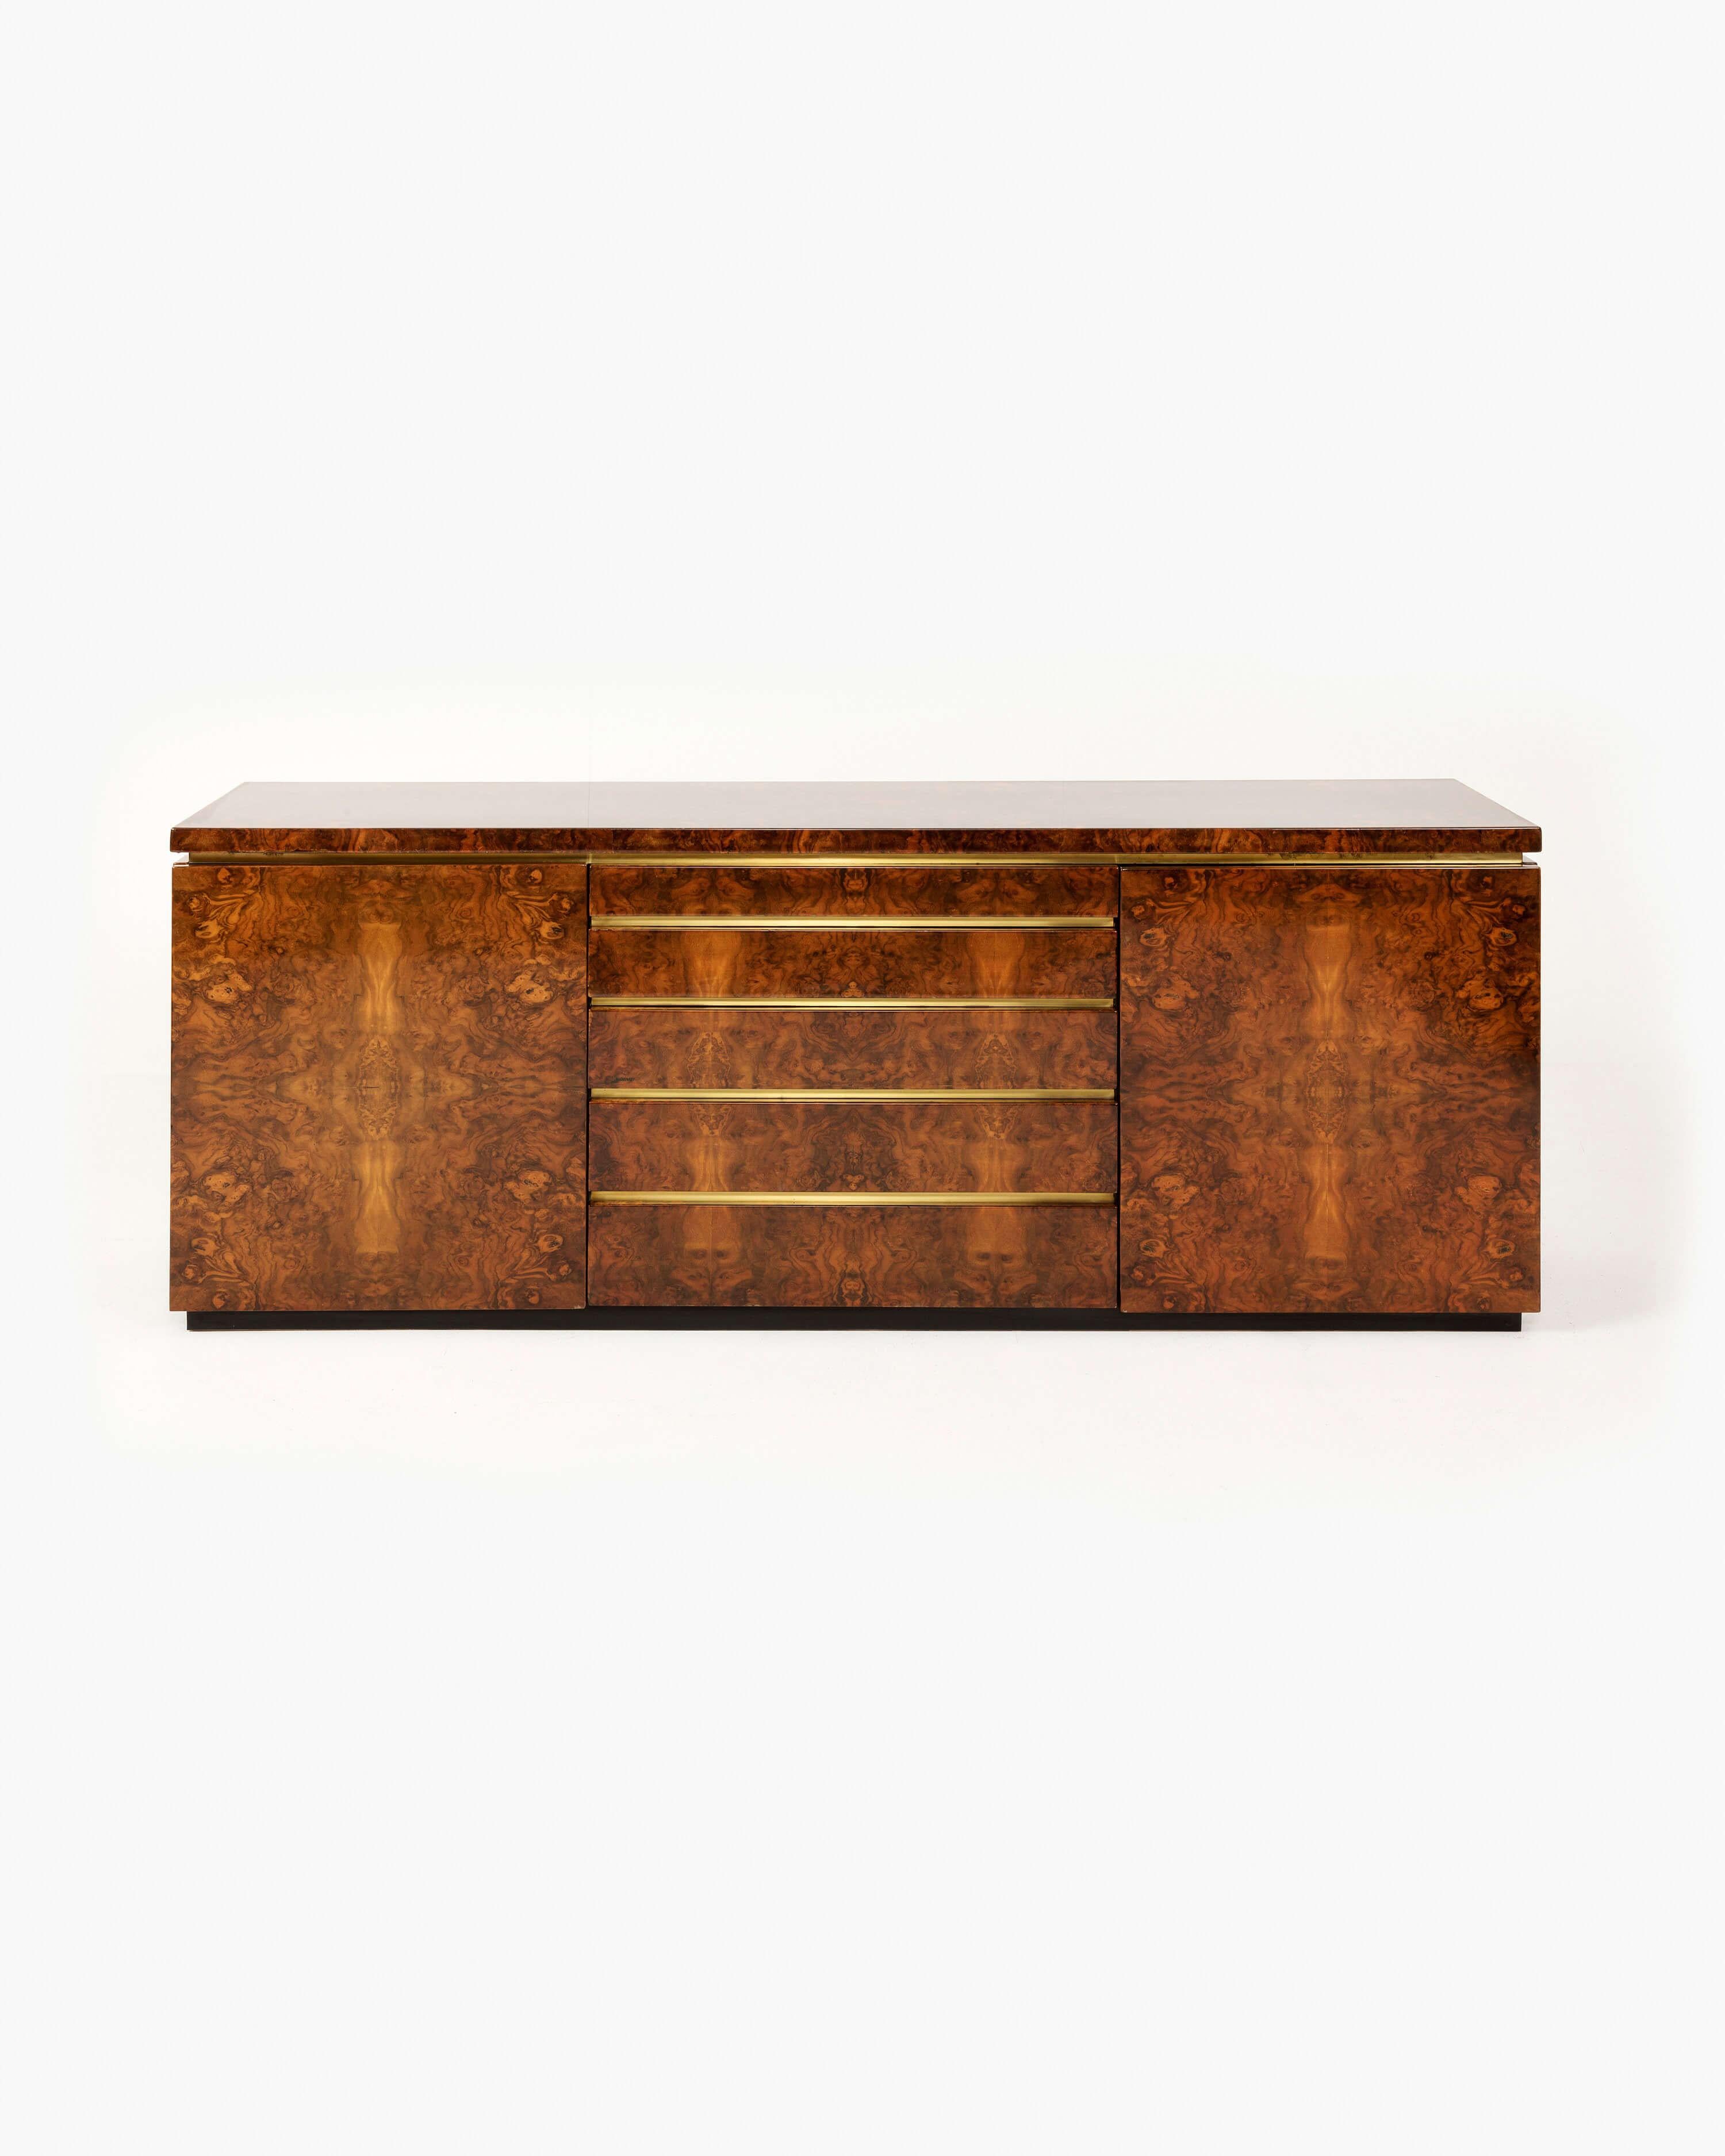 This lacquered burl sideboard by french designer Jean-Claude Mahey boasts a distinguished gilded profile that reflects the designer's affinity for the finest materials. Born in the northwestern French city of Mayenne—a region populated by small